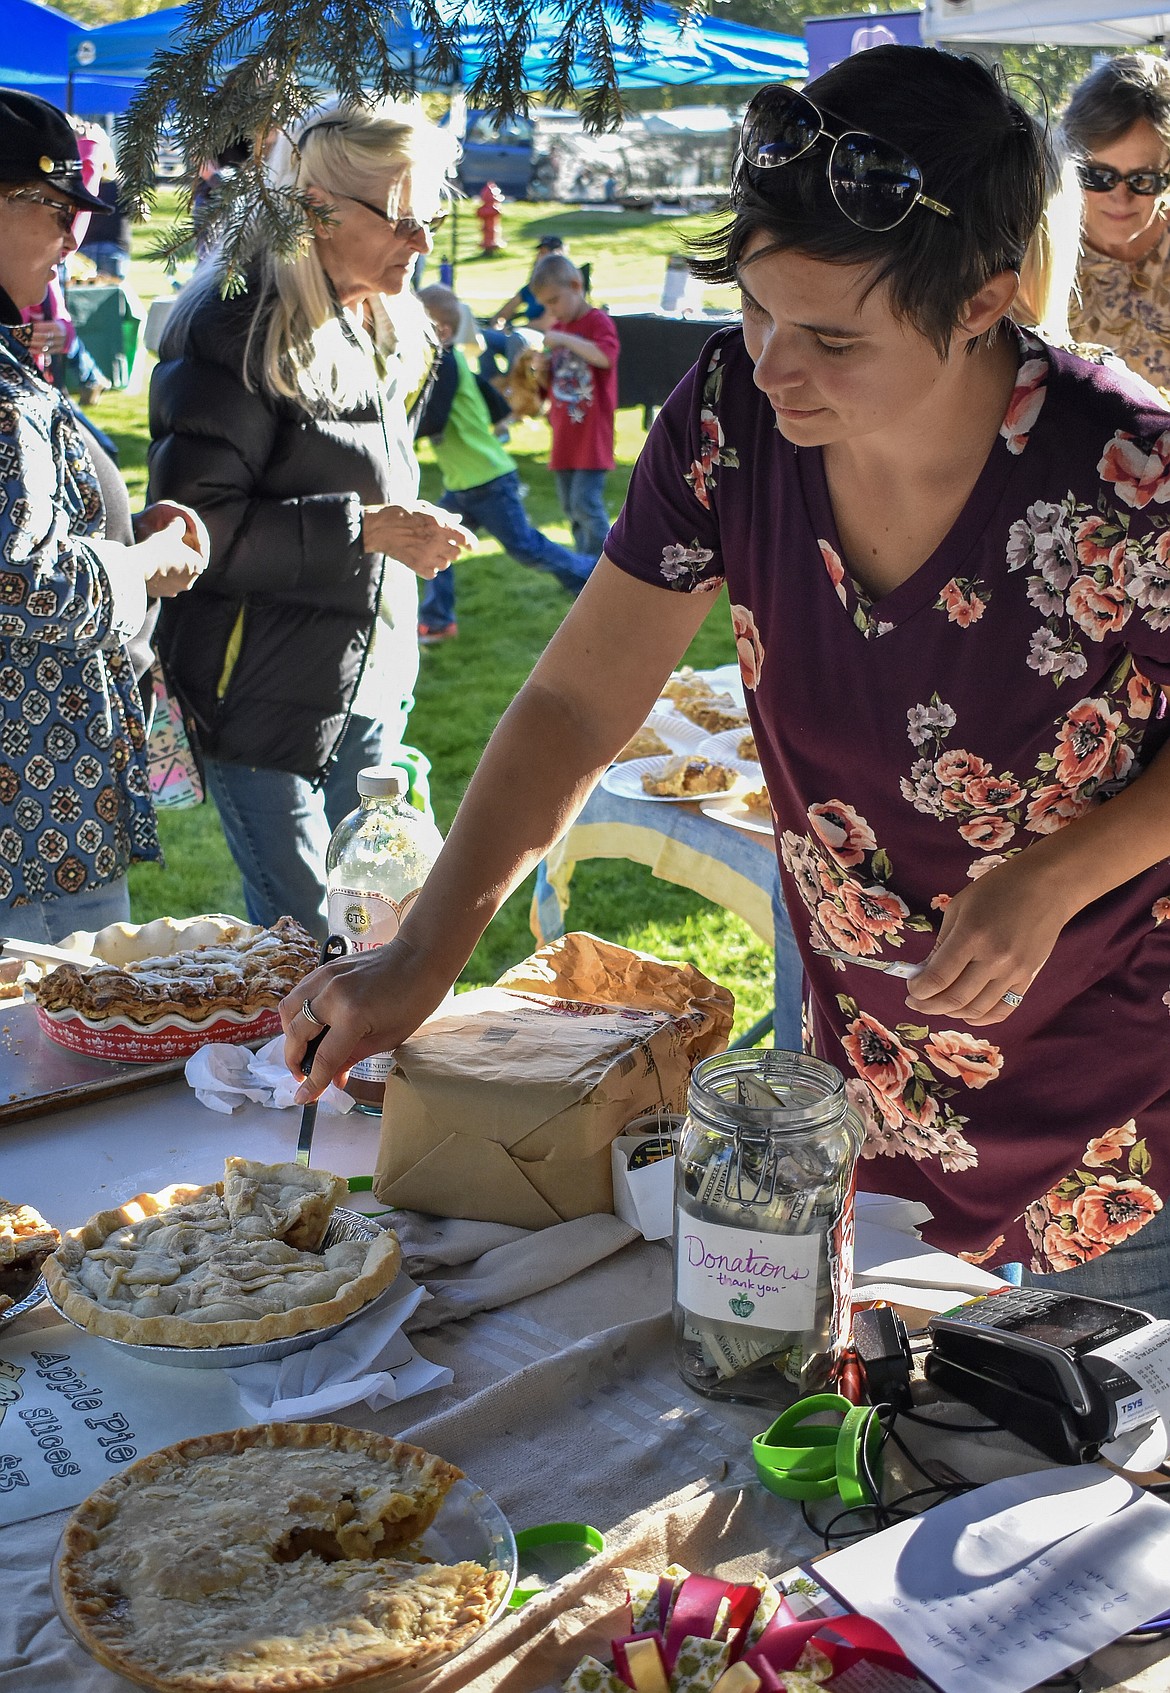 Shawna Kelsey, with the Troy Farmer&#146;s Market and Yaak Valley Forest Council, serves up a slice of Carol Lisle&#146;s prize-winning apple pie Friday at the Troy Farmer&#146;s Market Apple Festival. Lisle&#146;s pie won second place, and first went to Karyn Larsen&#146;s apple pie pictured to the left. (Ben Kibbey/The Western News)